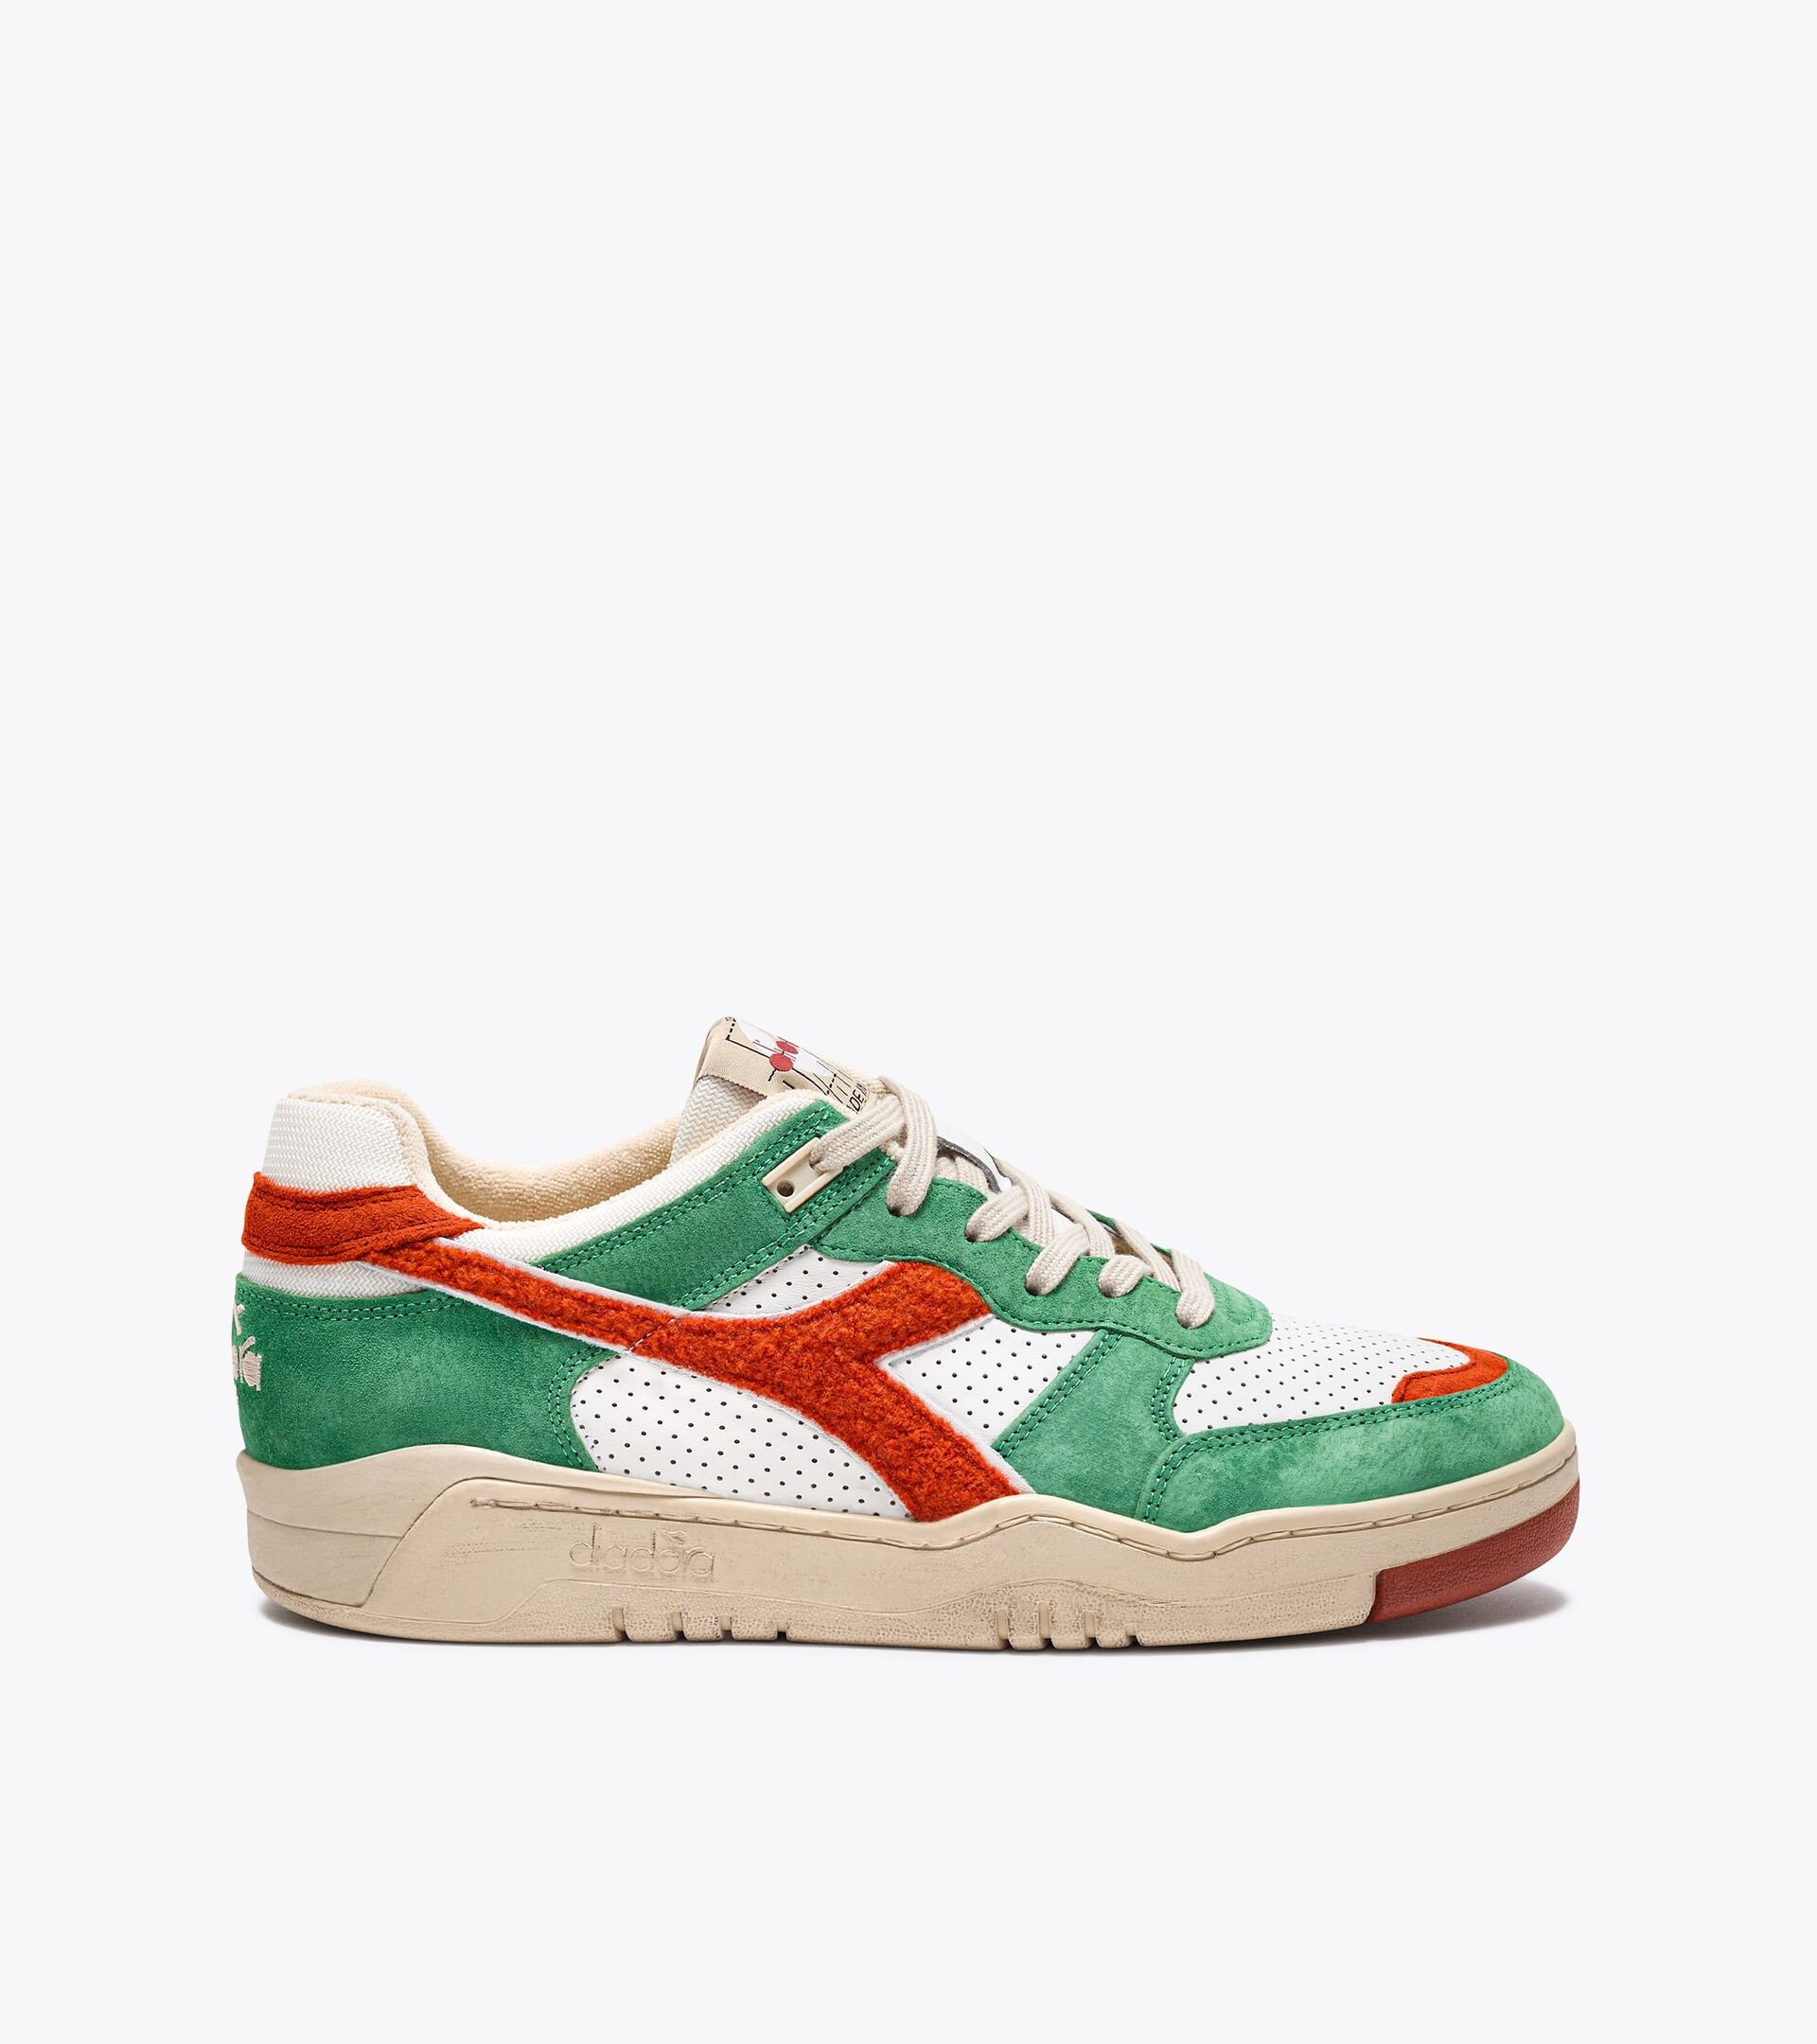 Sneakers Heritage - Made in Italy - Gender neutral B.560 USED RR ITALIA MARRON ROUILLE - Diadora